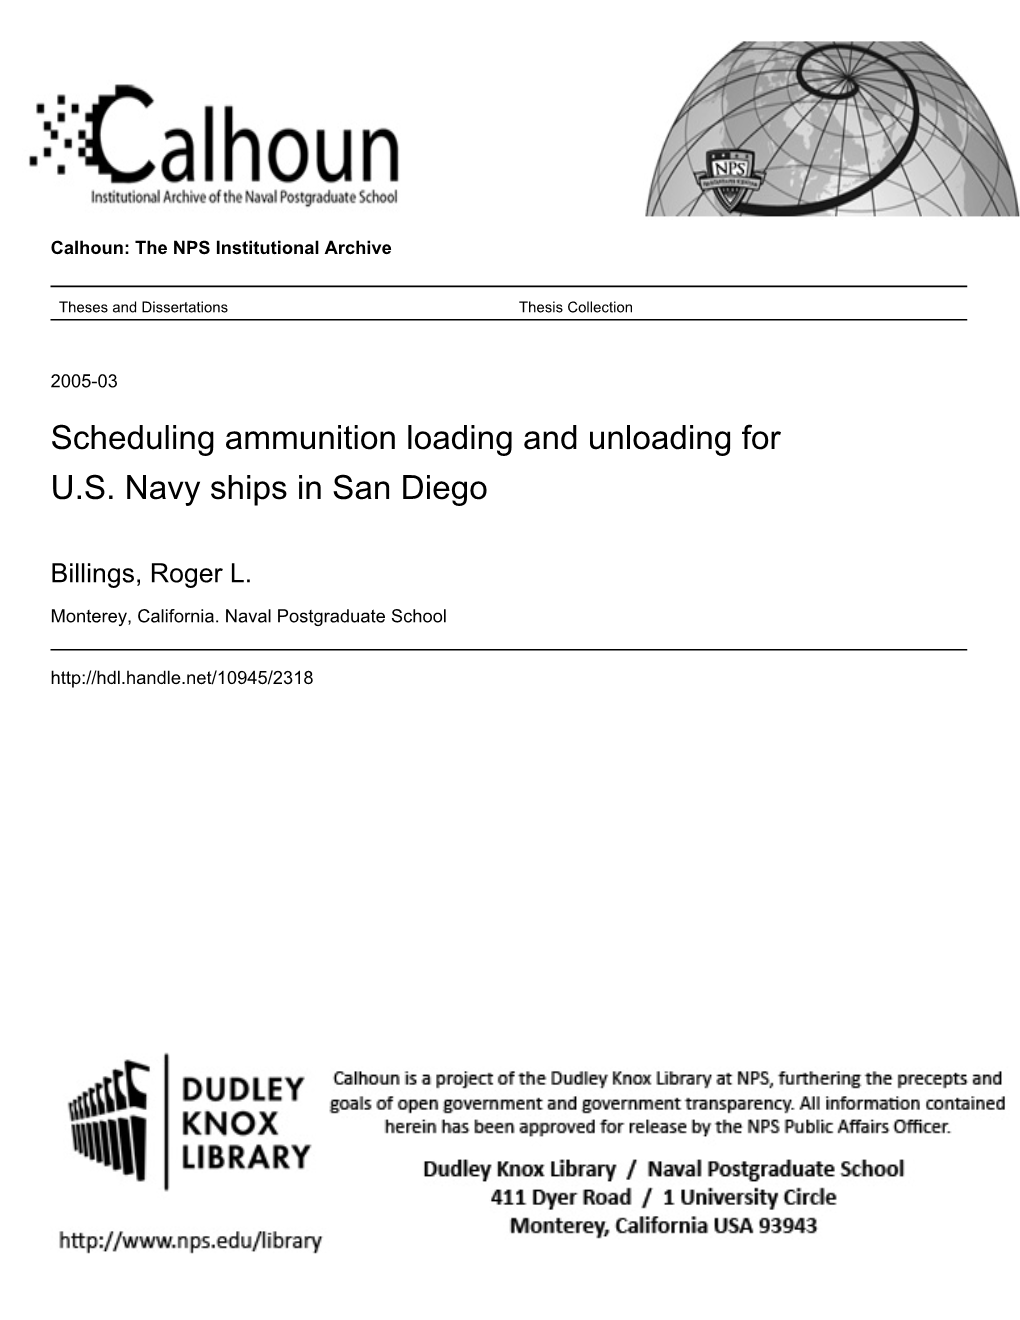 Scheduling Ammunition Loading and Unloading for U.S. Navy Ships in San Diego